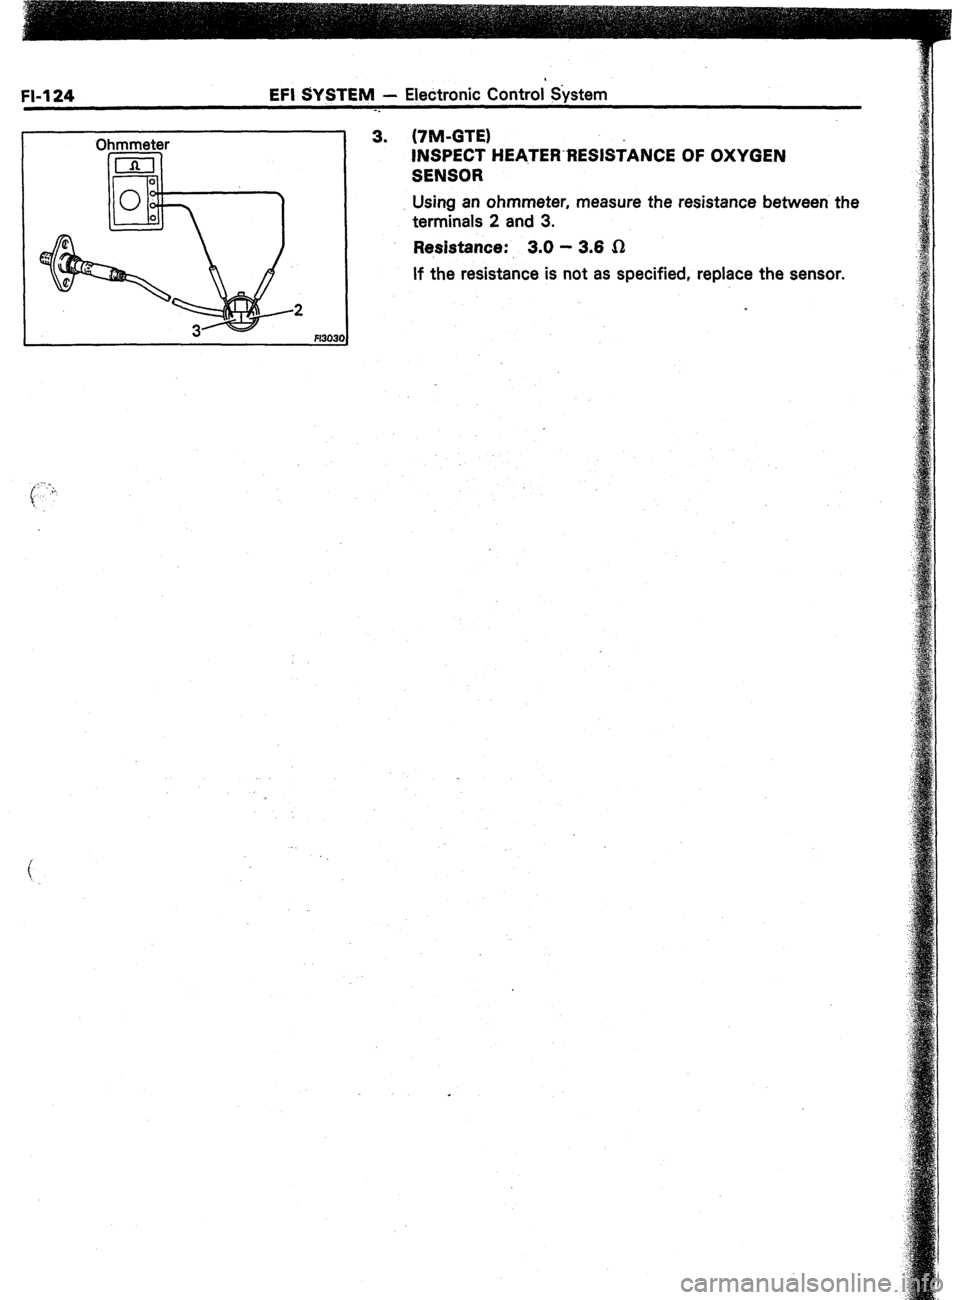 TOYOTA CELICA 1987  Service Repair Manual FI-124 EFI SYSTEM - Electronic Control System 
-. 
Ohmmeter 3. (‘IM-GTE) 
INSPECT HEATERAESISiANCE OF OXYGEN 
SENSOR 
Using an ohmmeter, measure the resistance between the 
terminals 2 and 3. 
R8SiS